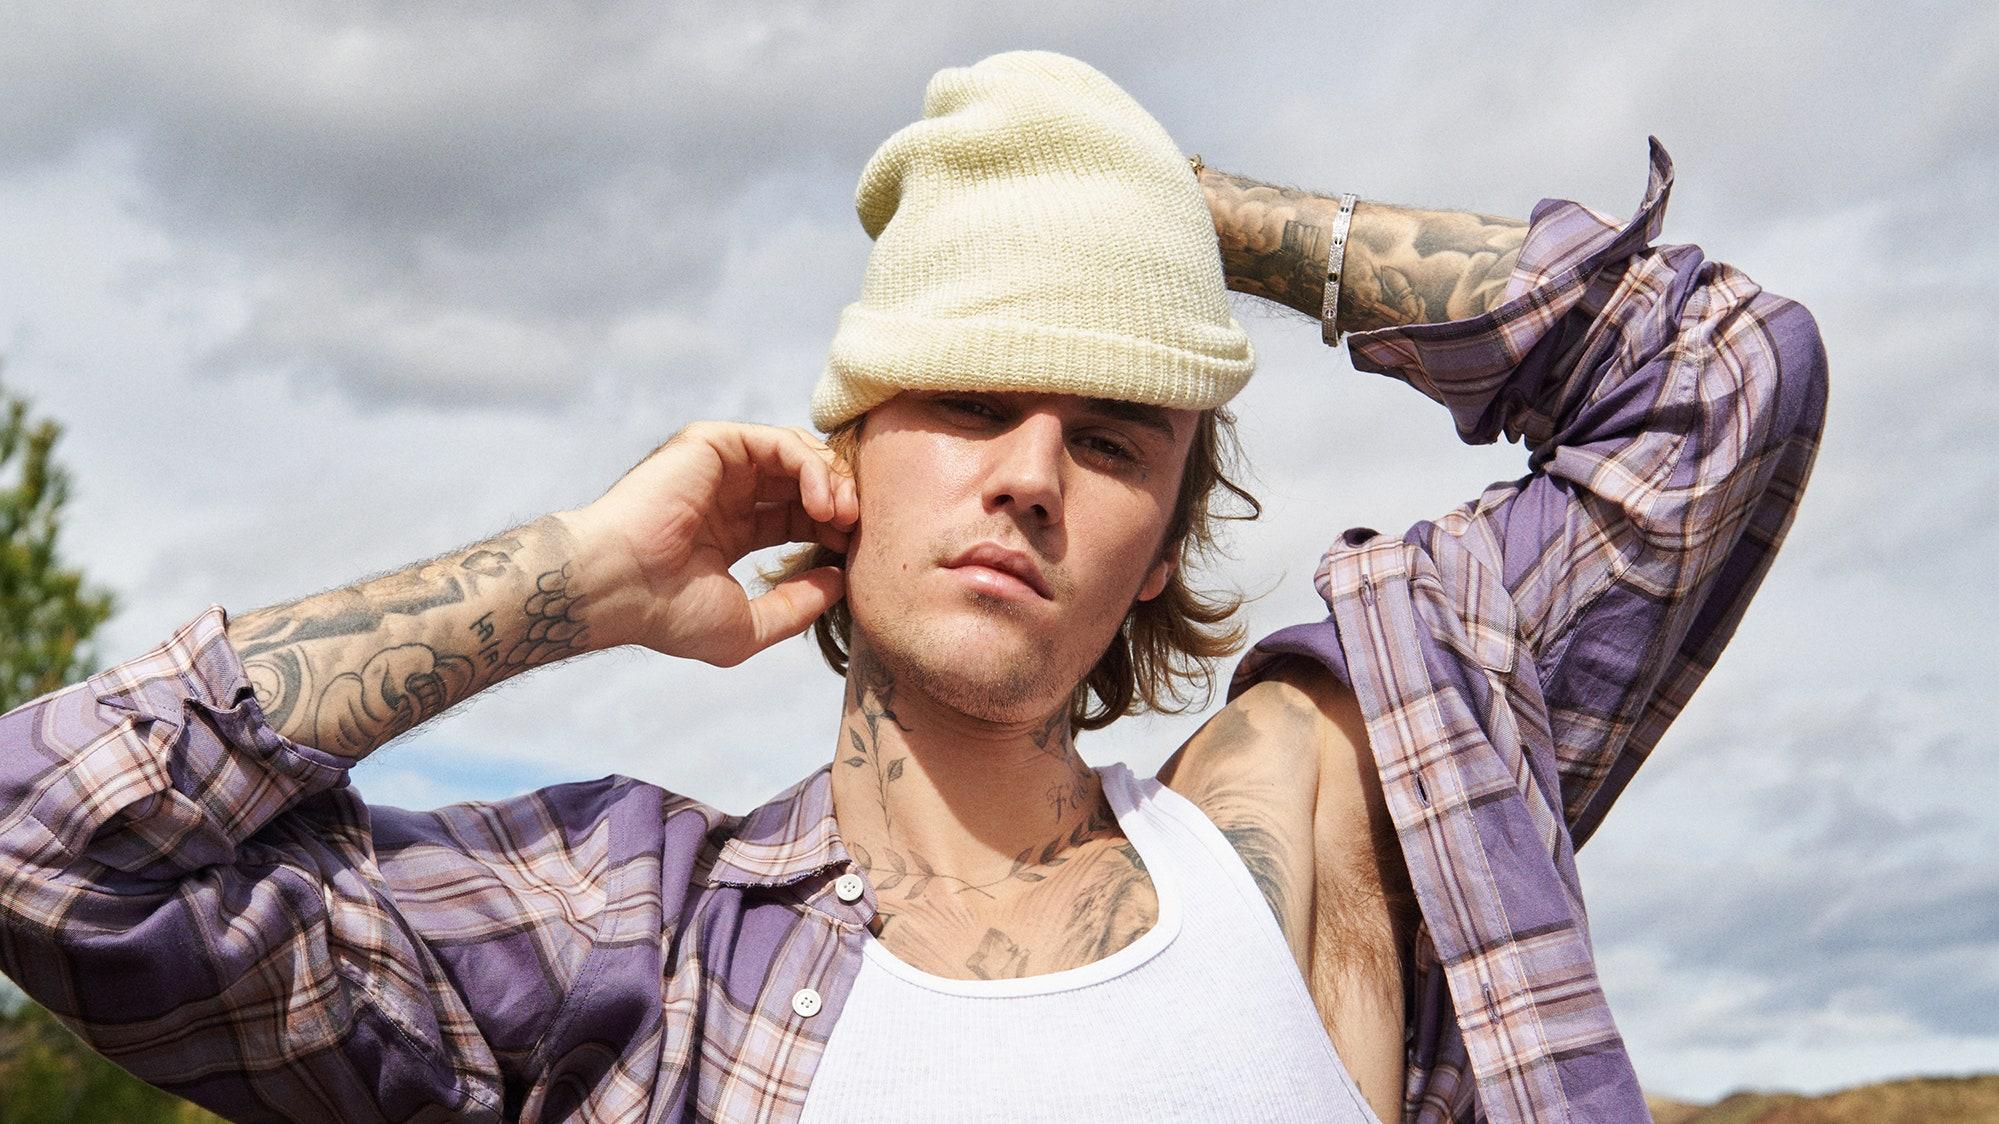 Justin Bieber and the Treadmill of Fame: The Dangers of Celebrity